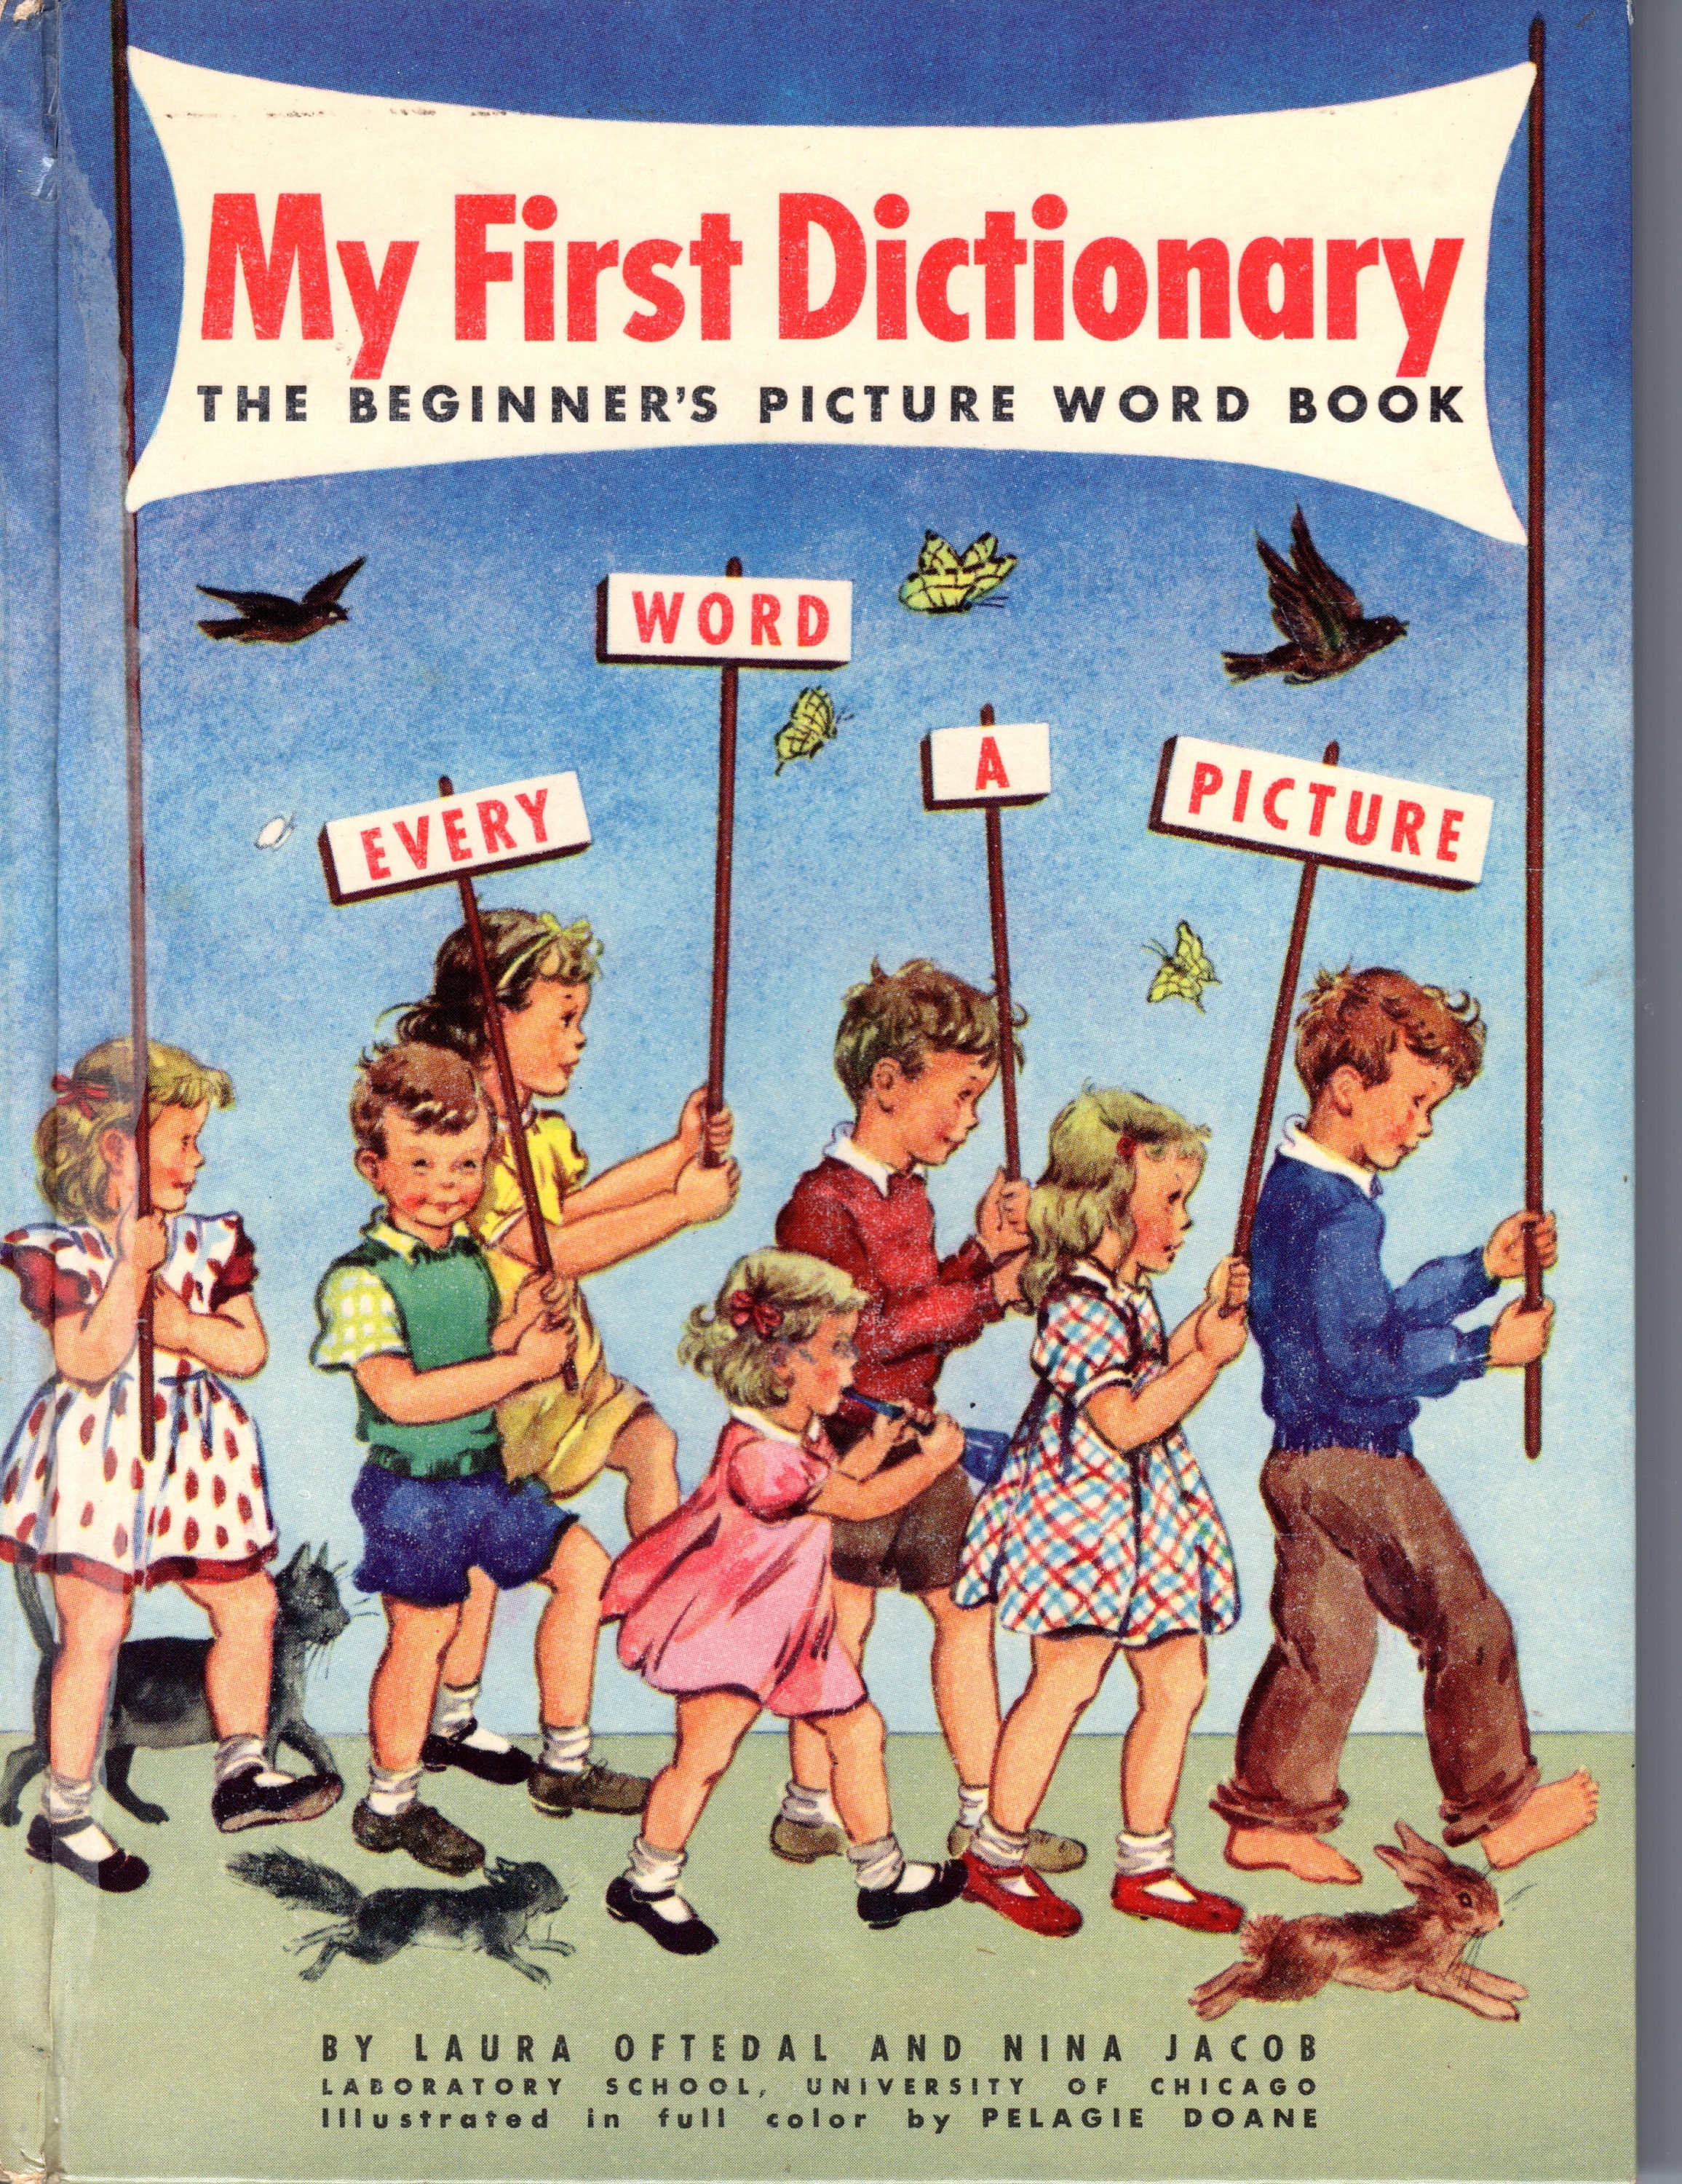 First dictionary. My first Dictionary. Books Words picture. Betty r. "my first Dictionary".